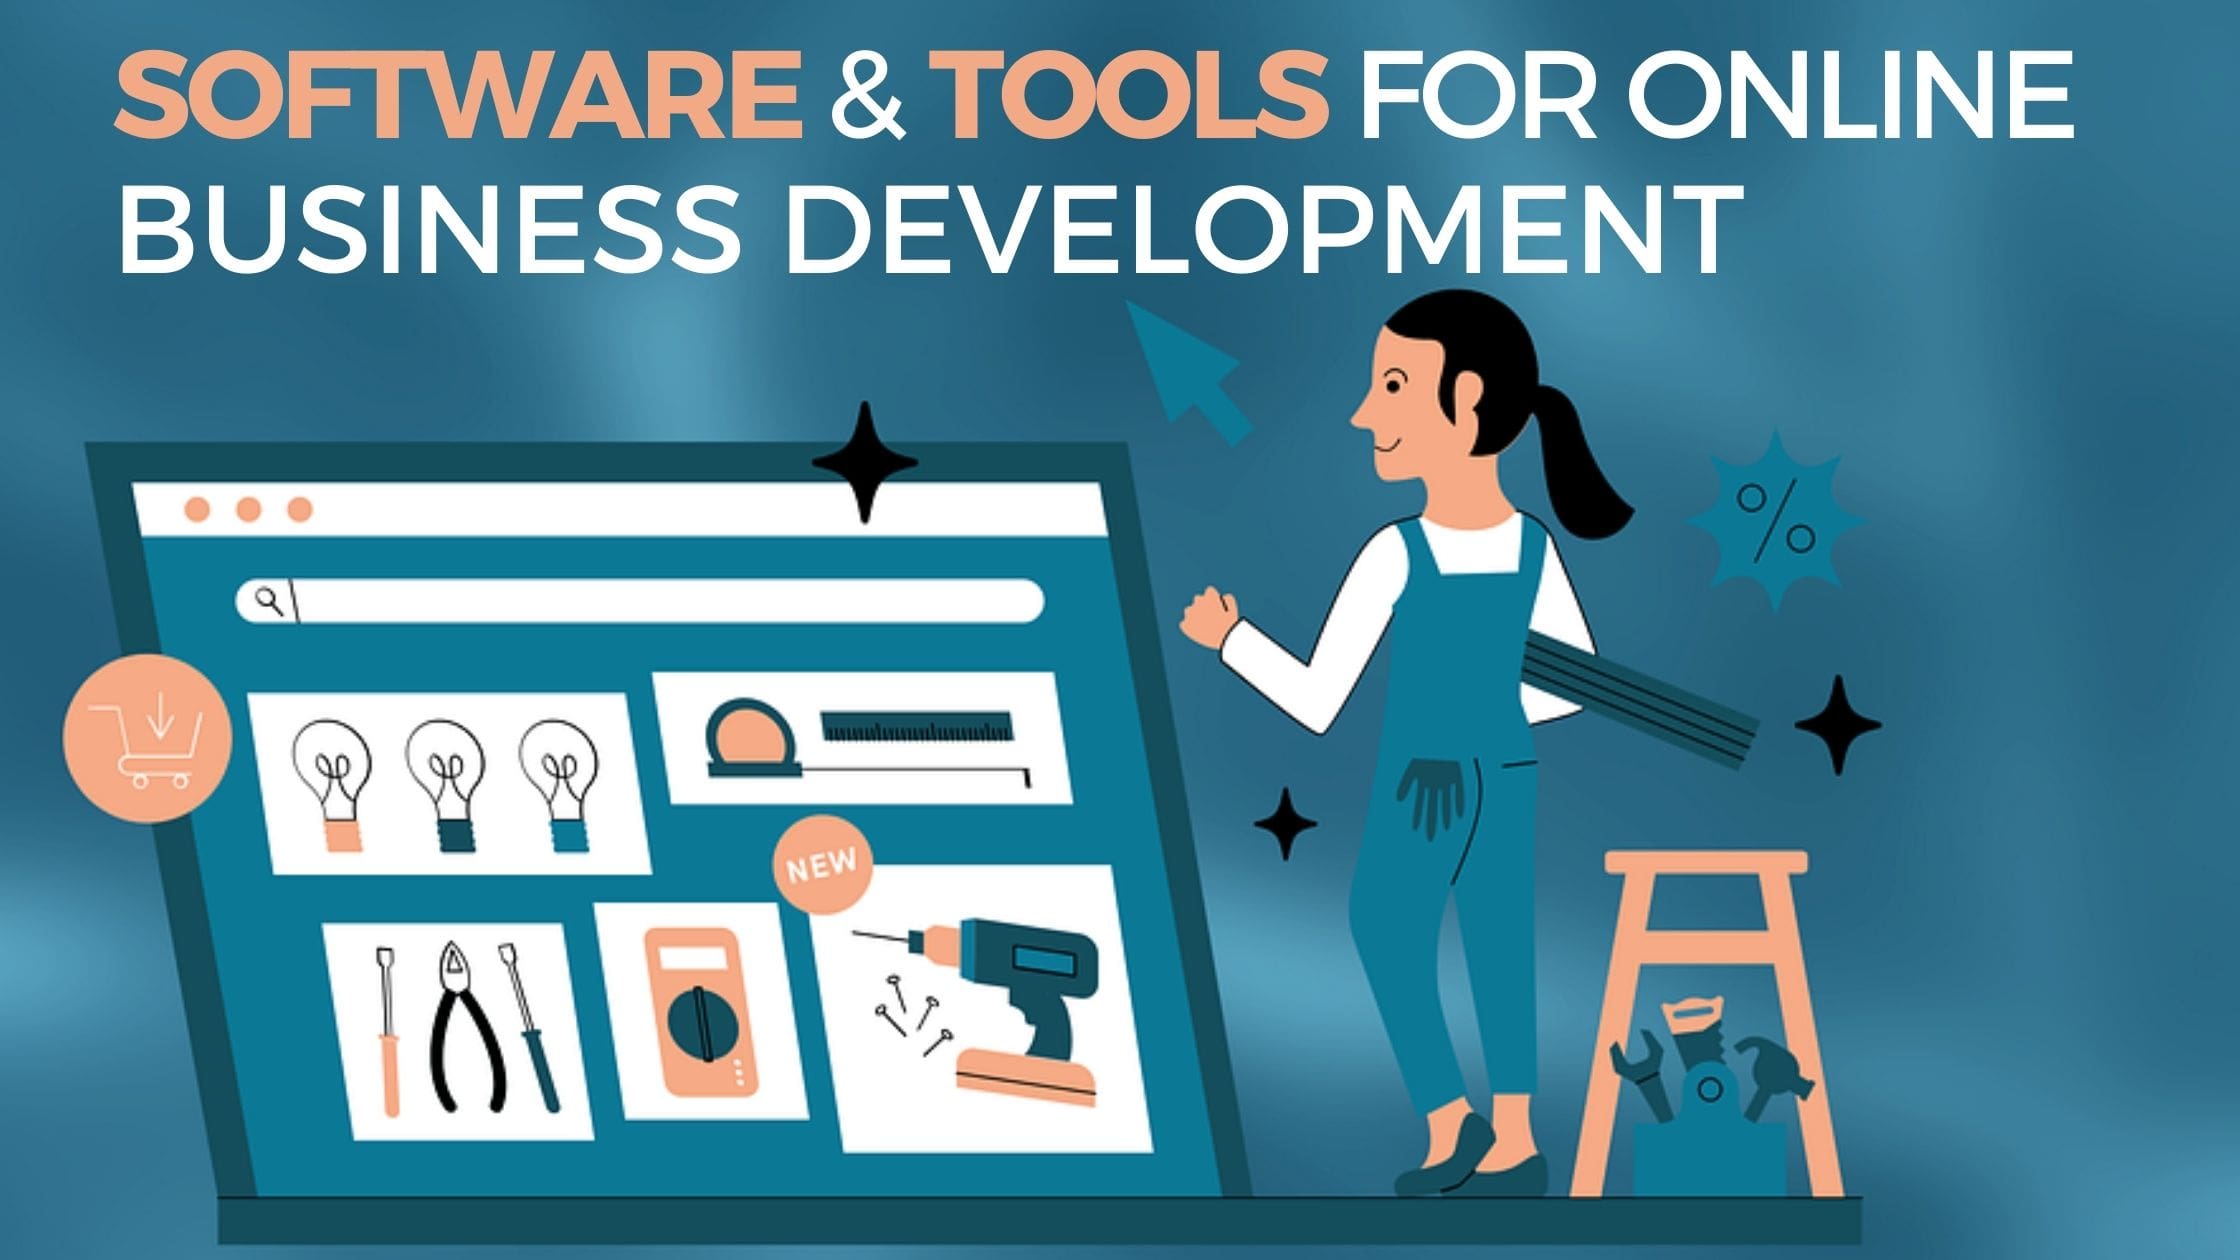 Online Tools for Business What are the best Tools and Software for Online Business Development [2022 Updated]